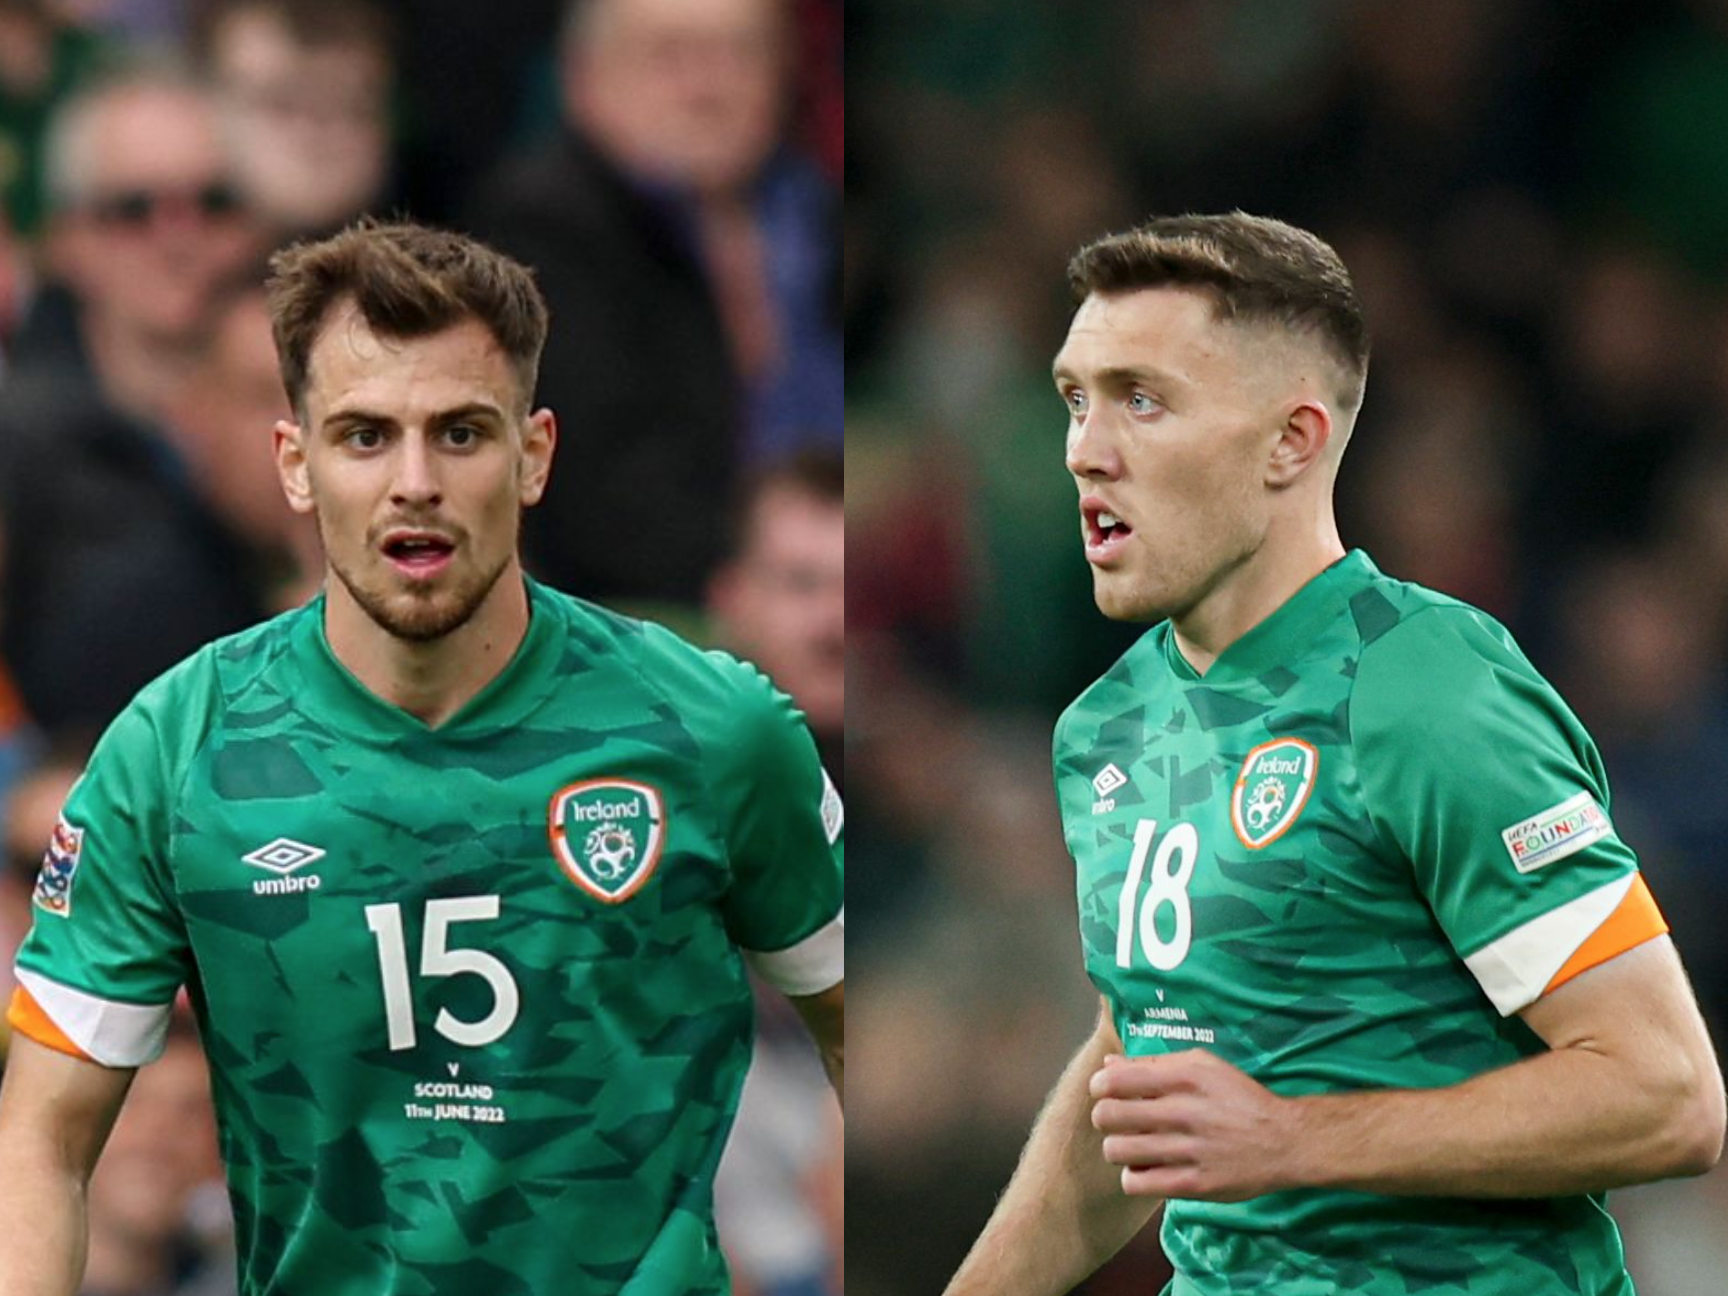 Images of Jayson Molumby and Dara O'Shea side-by-side, both in Ireland kit